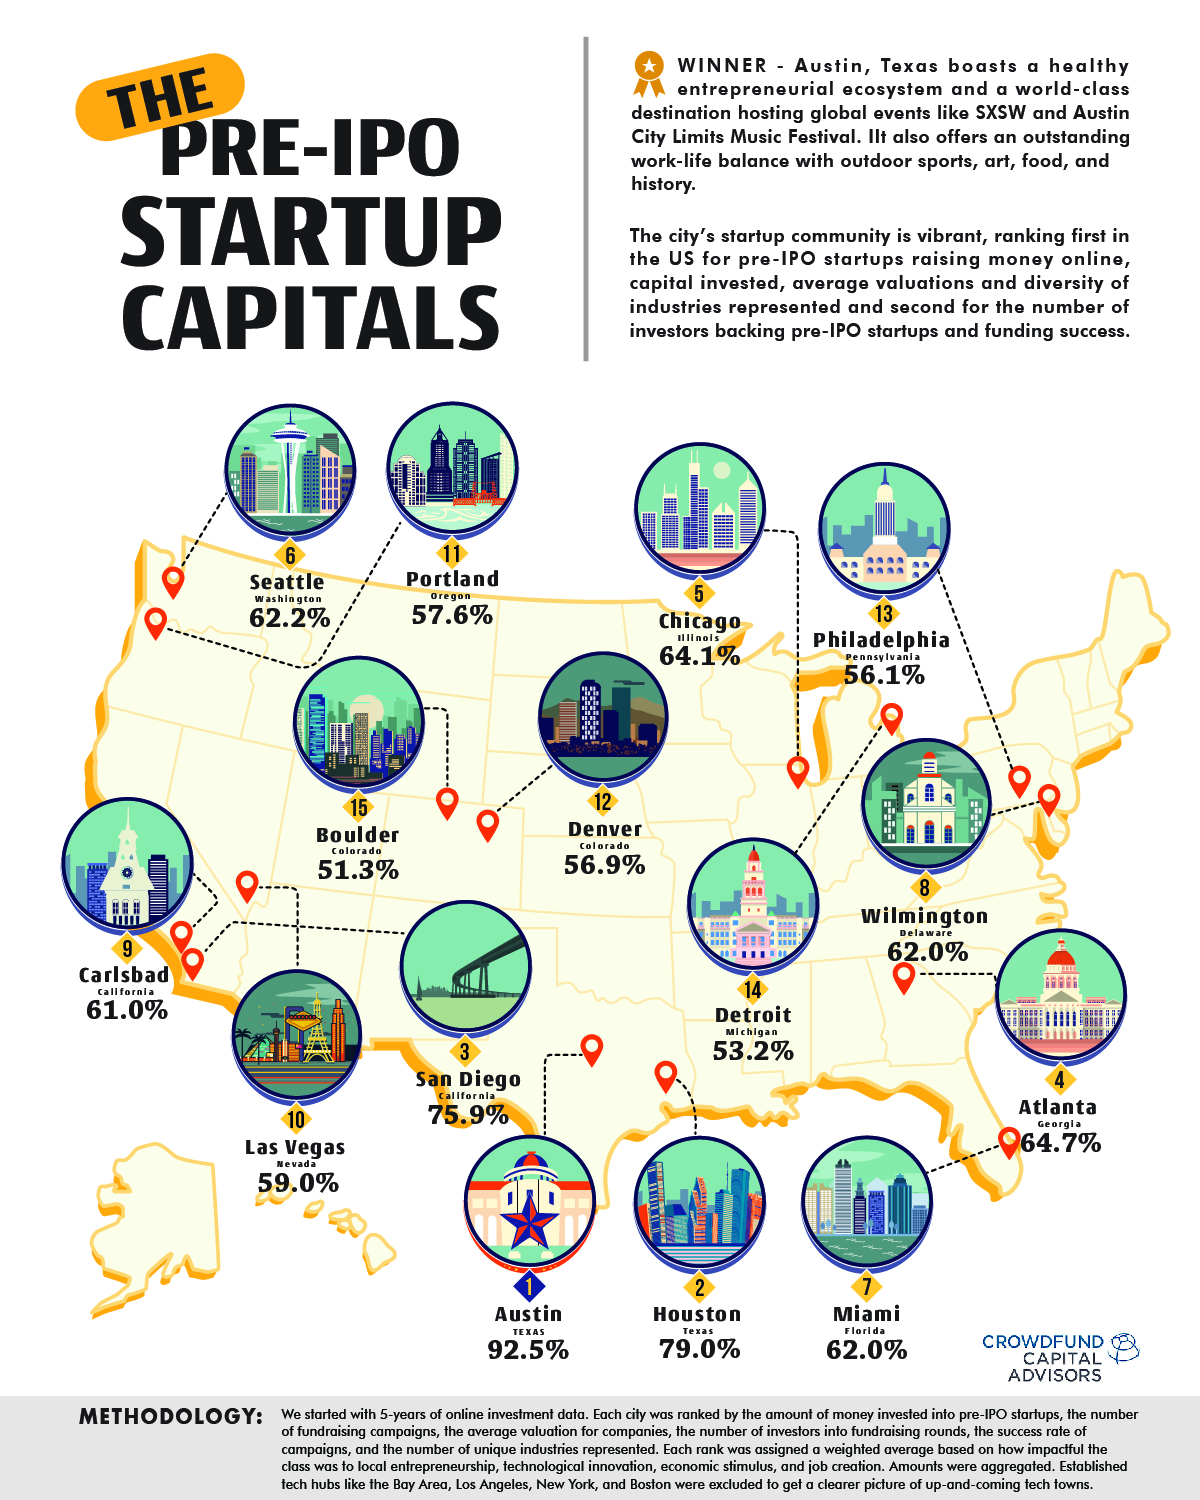 The Pre-IPO Startup Capitals